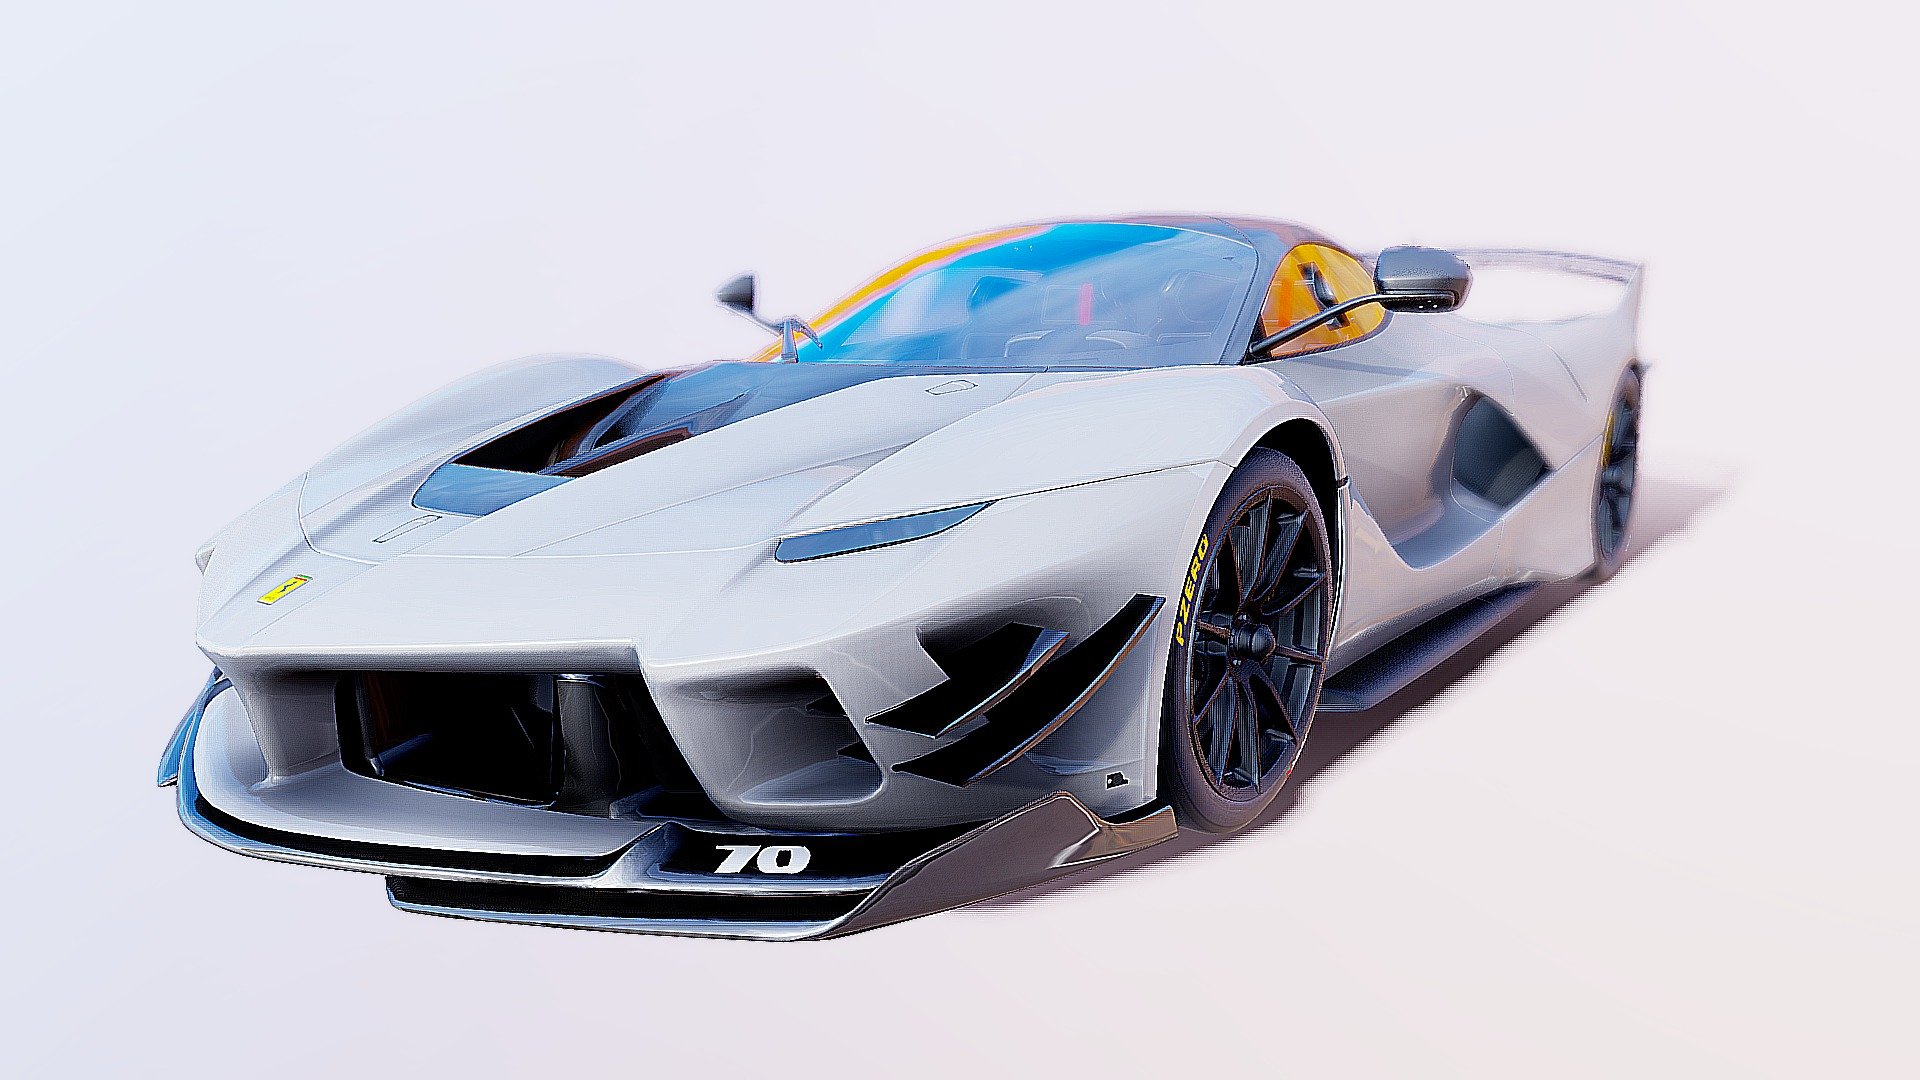 Ferrari's XX program began in 2005. In 2014, the Maranello brand launched the Ferrari FXX K. Now here is an even sharper version called Ferrari FXX-K Evo.

The main projects relate to weight reduction and aerodynamics.

However, the manufacturer does not specify how many kilos have been removed from the 1,155 of the “base” Ferrari FXX K. On the other hand, it specifies an optimization of the negative lift which has been improved by 23%.

Thanks For 600 Followers Guys :D - 2017 | Ferrari FXX-K Evo Special Thanks For 600 - Download Free 3D model by kevin (ケビン) (@sohyalebret) 3d model